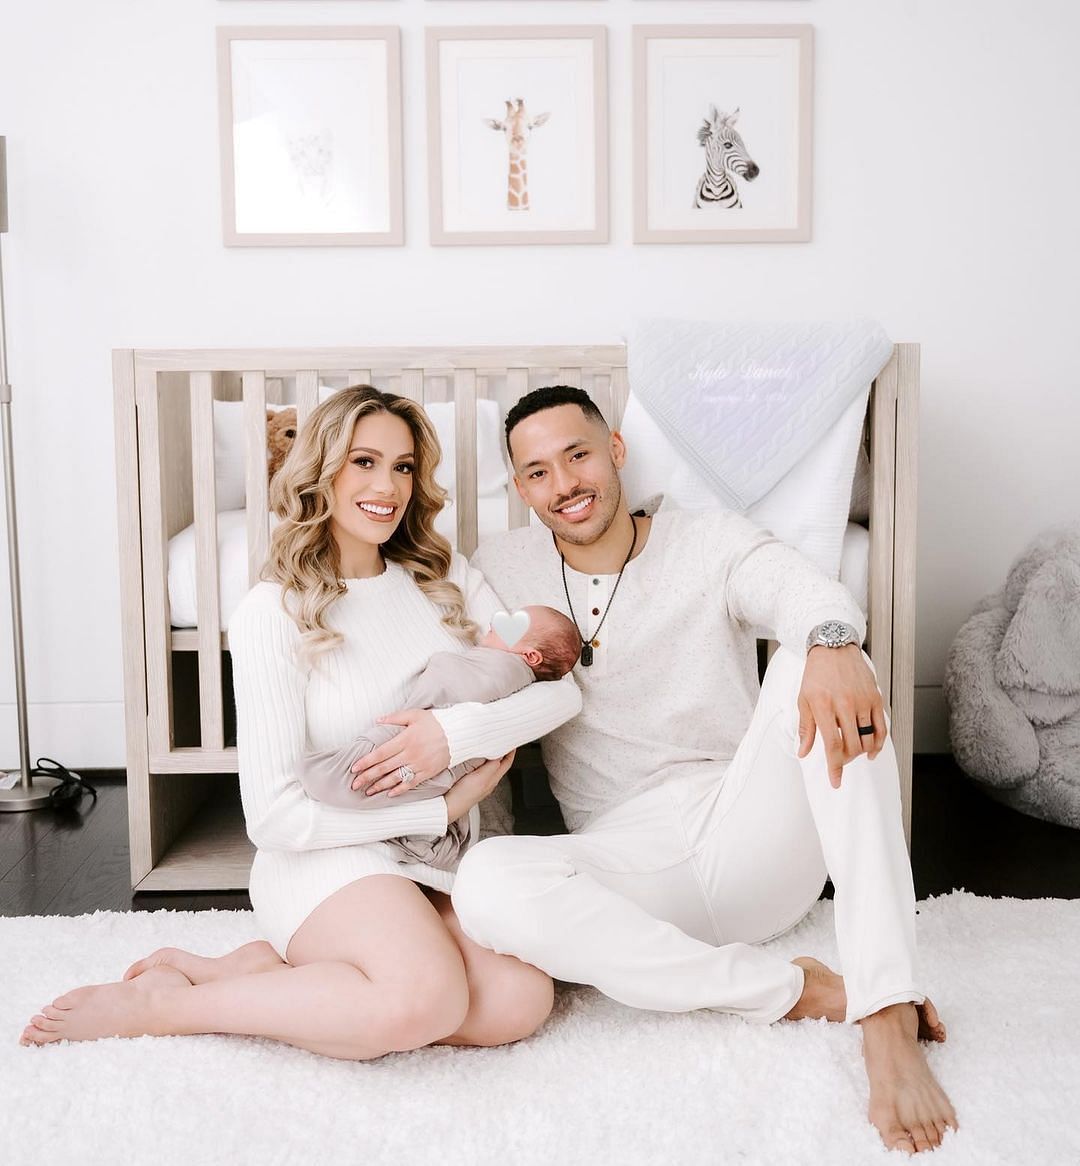 Carlos Correa with his wife, Danielle Rodriguez and his baby.